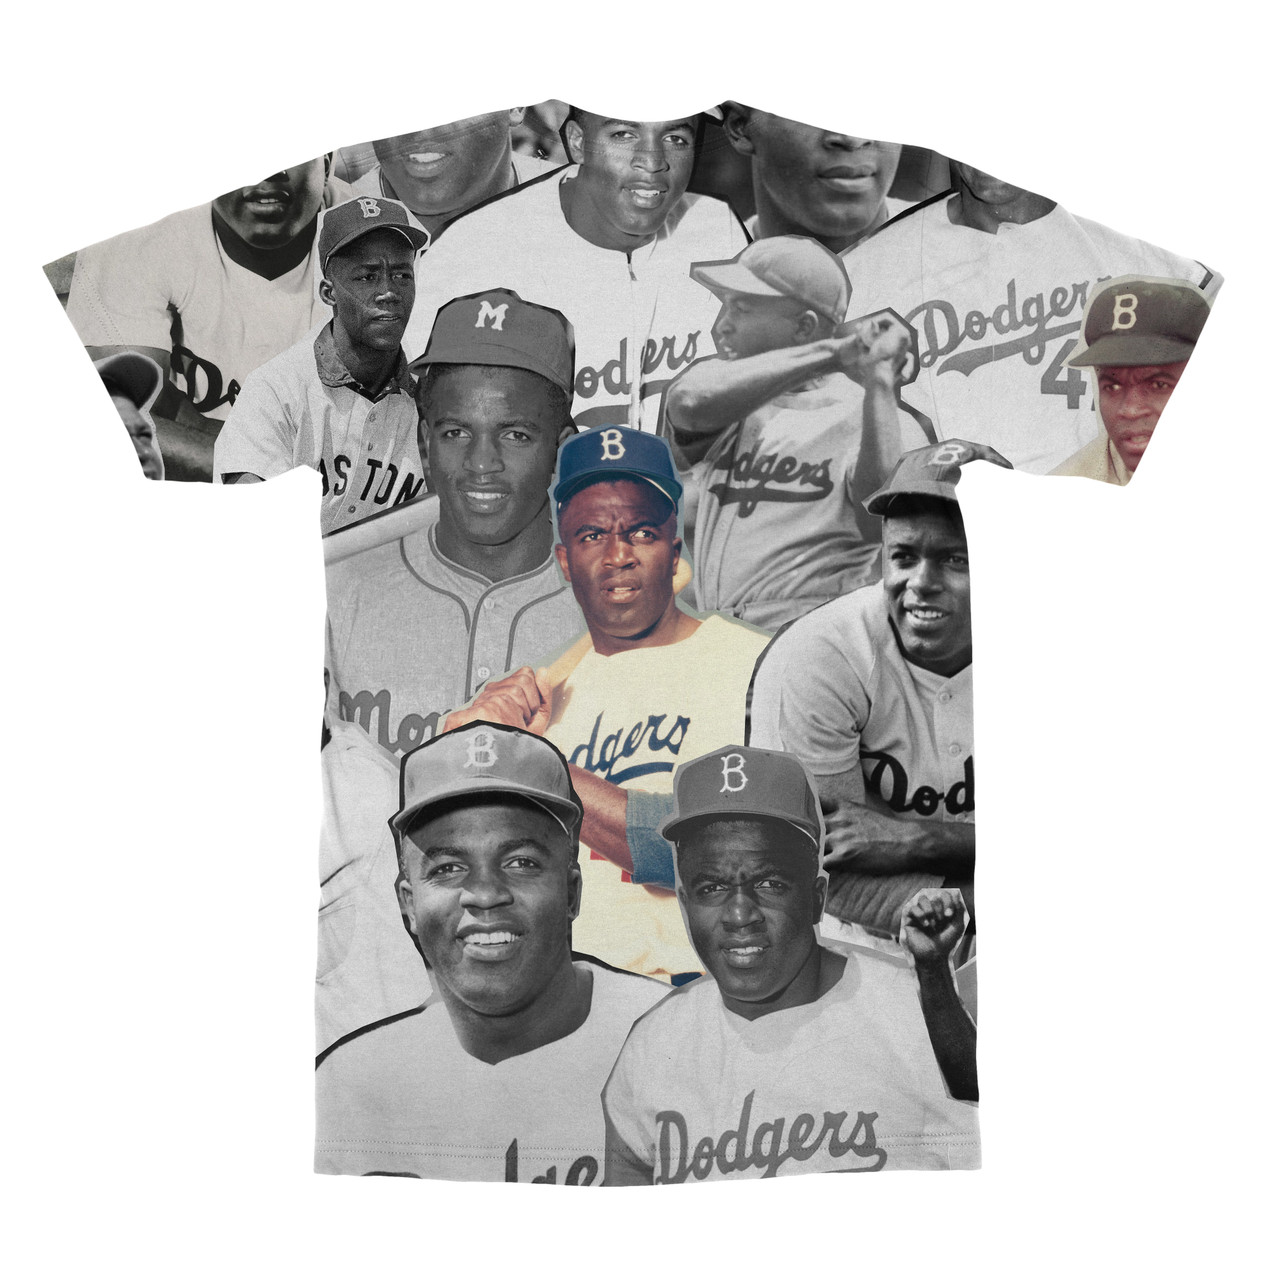 Jackie Robinson Photo Collage T-Shirt